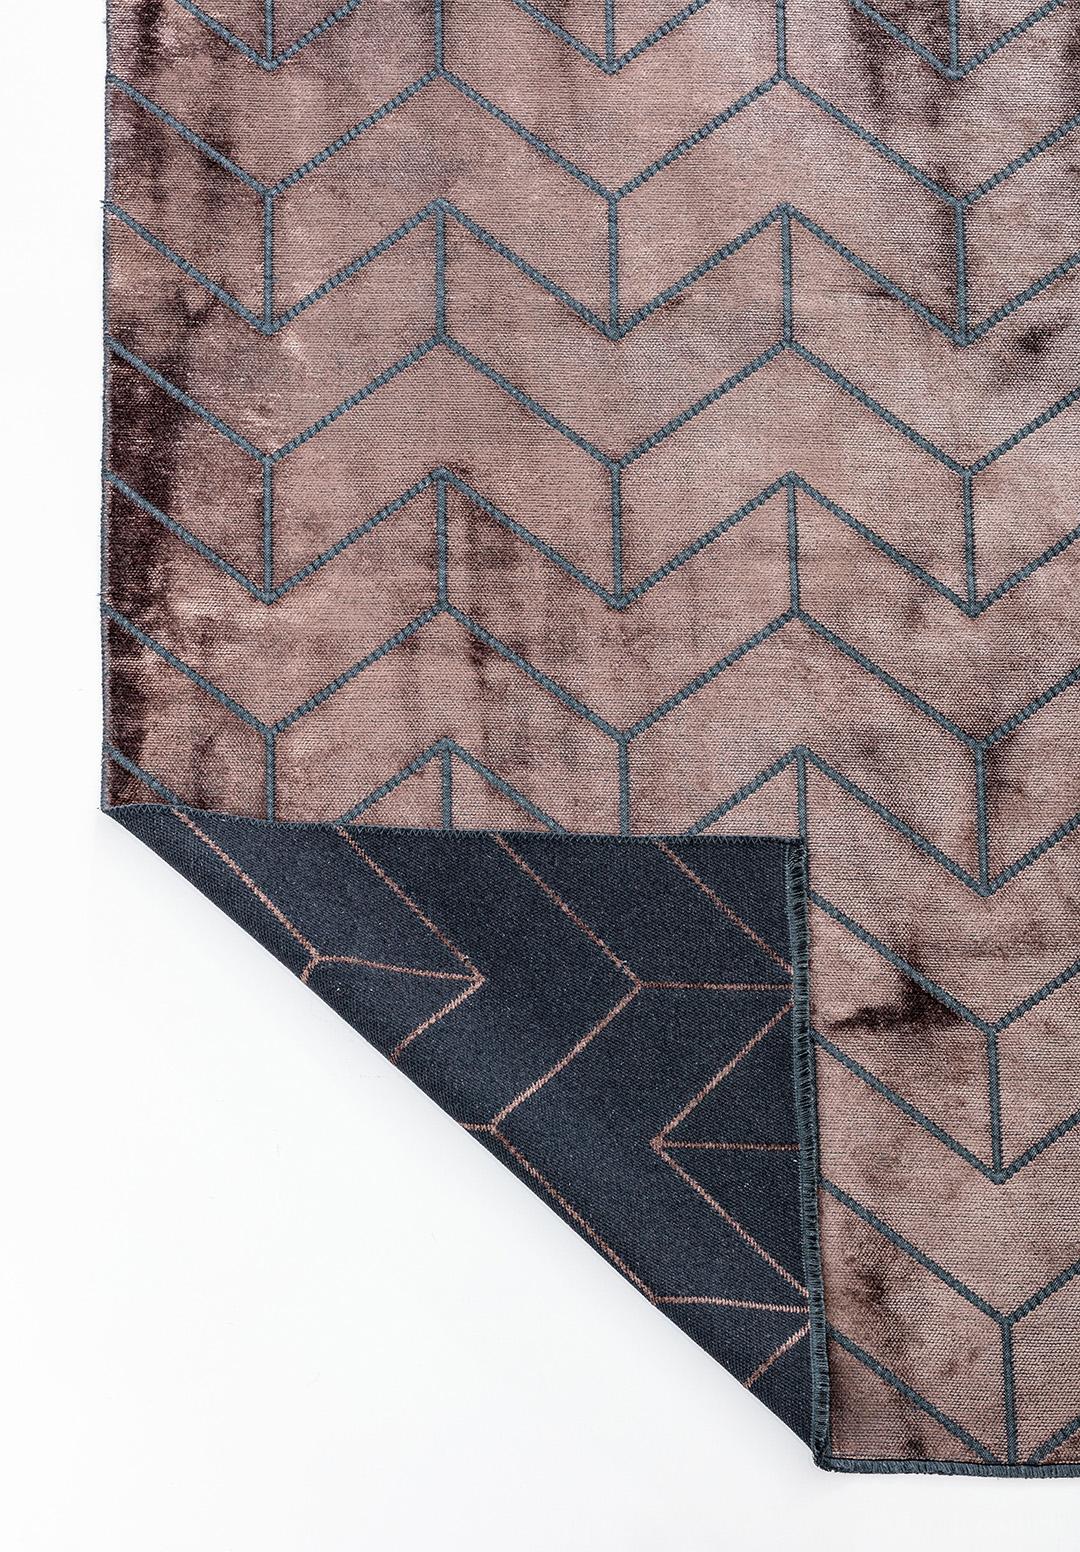 Post-Modern Contemporary Chevron Dark Brown Charcoal Luxury Area Rug Fringe Optional For Sale